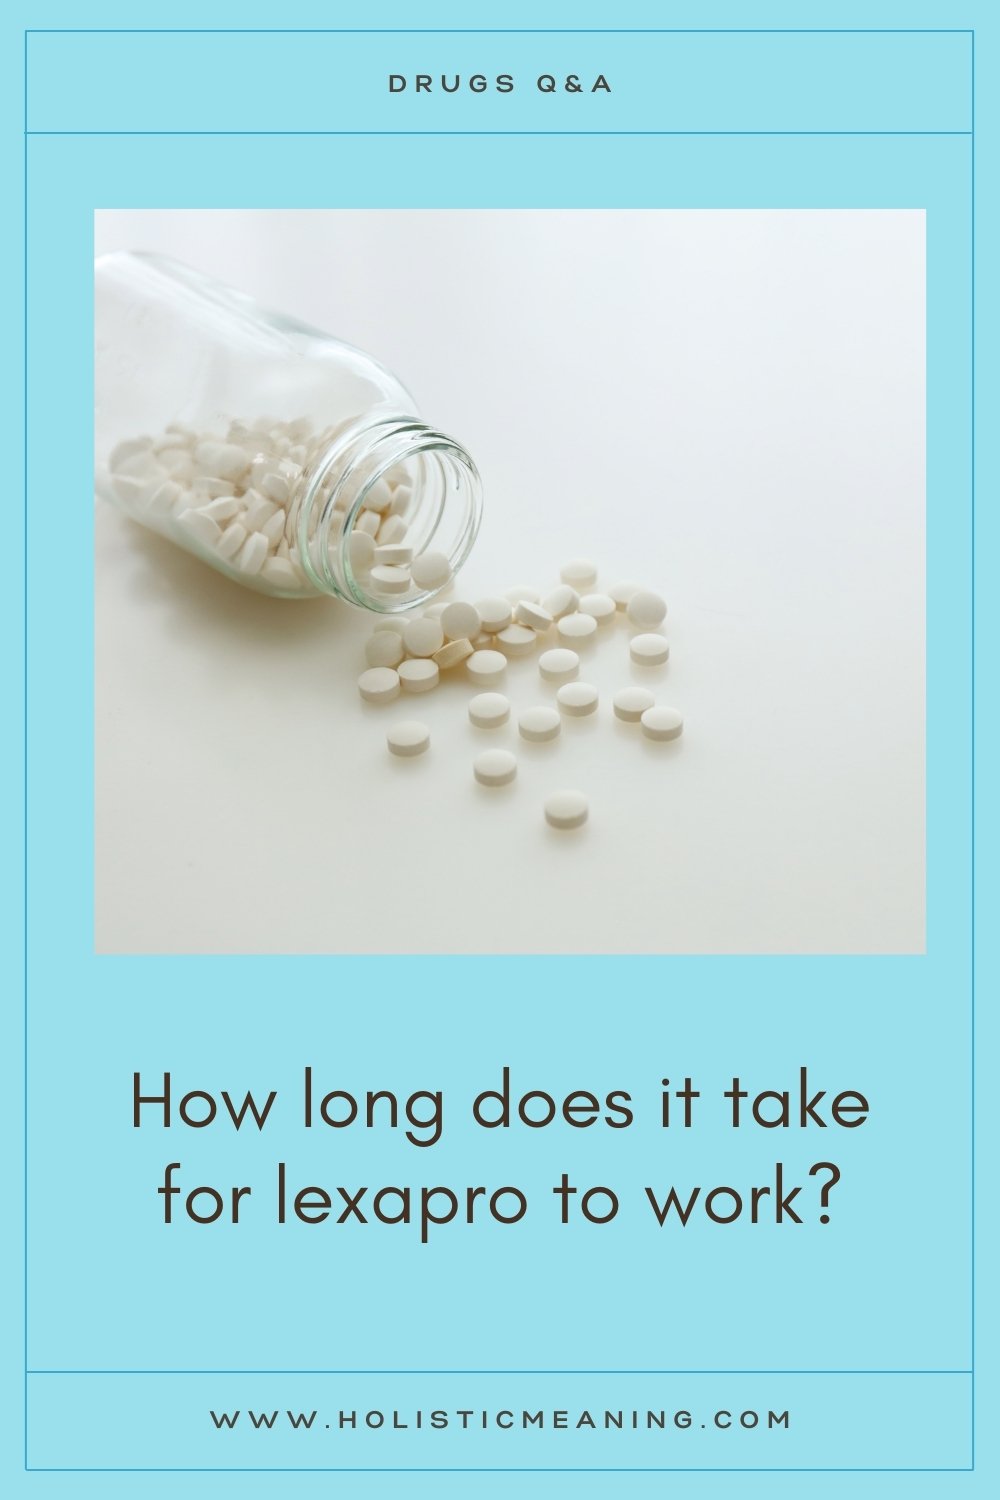 How long does it take for lexapro to work?